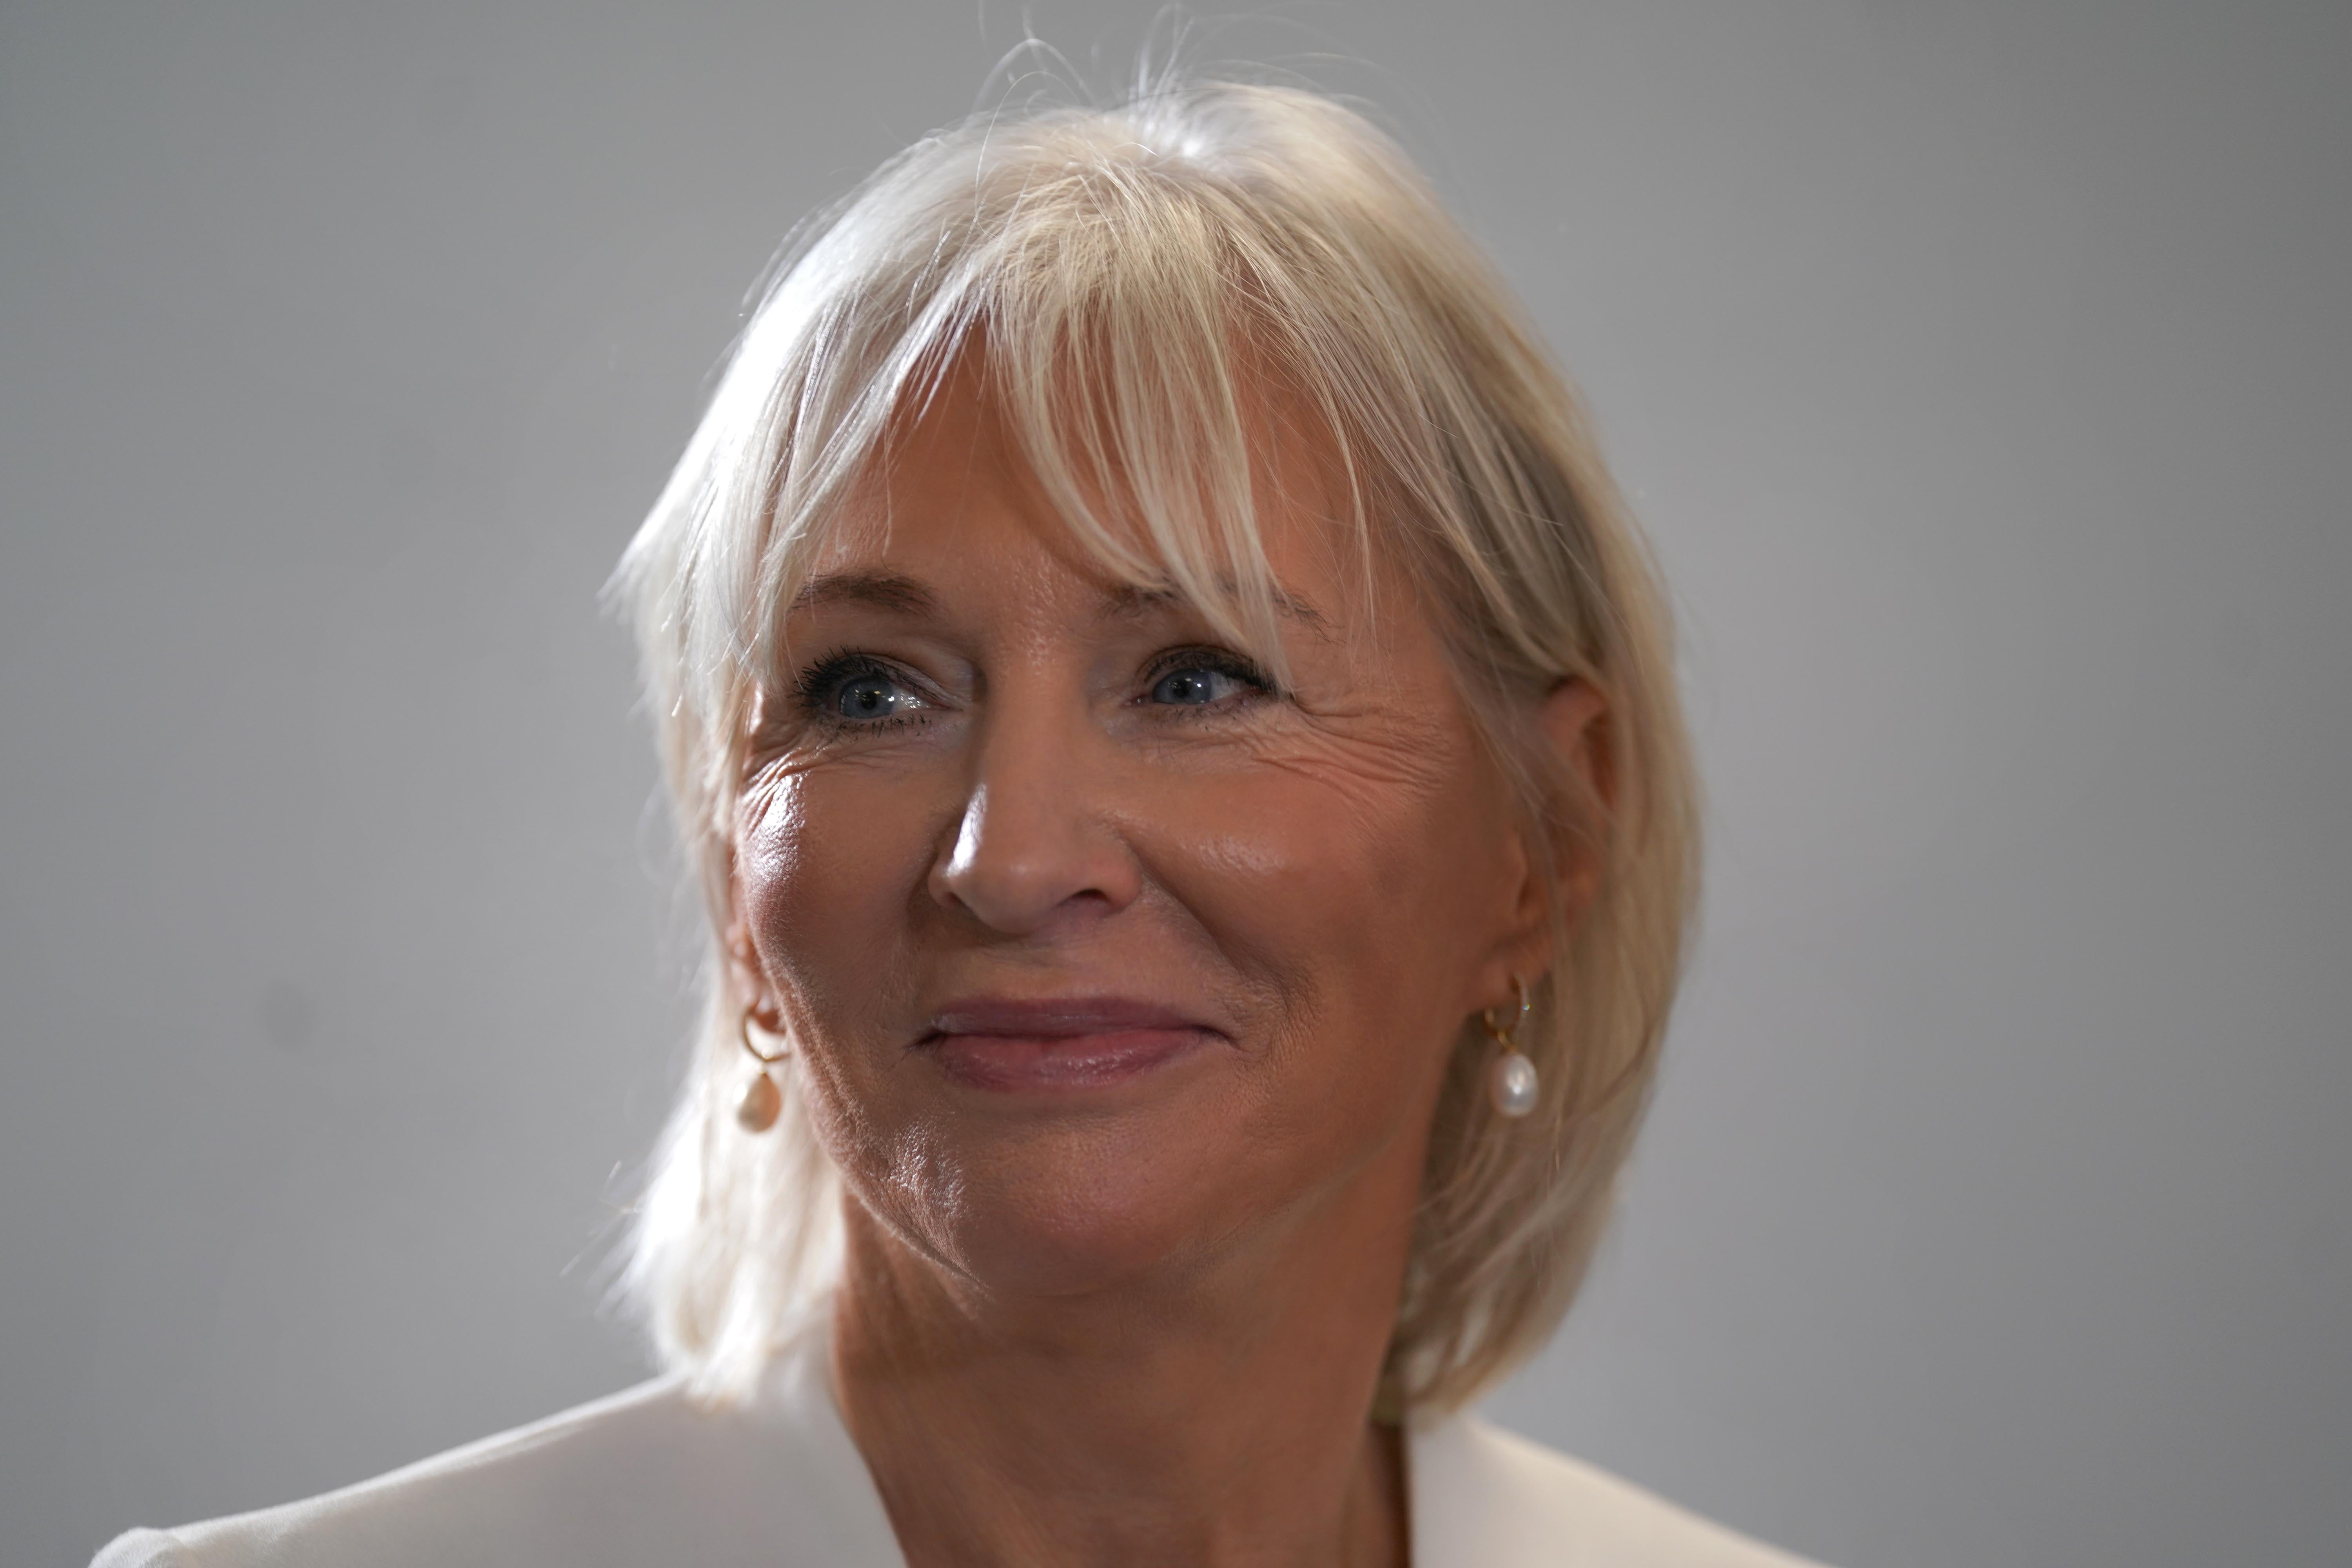 The tweet by Culture Secretary Nadine Dorries was criticised